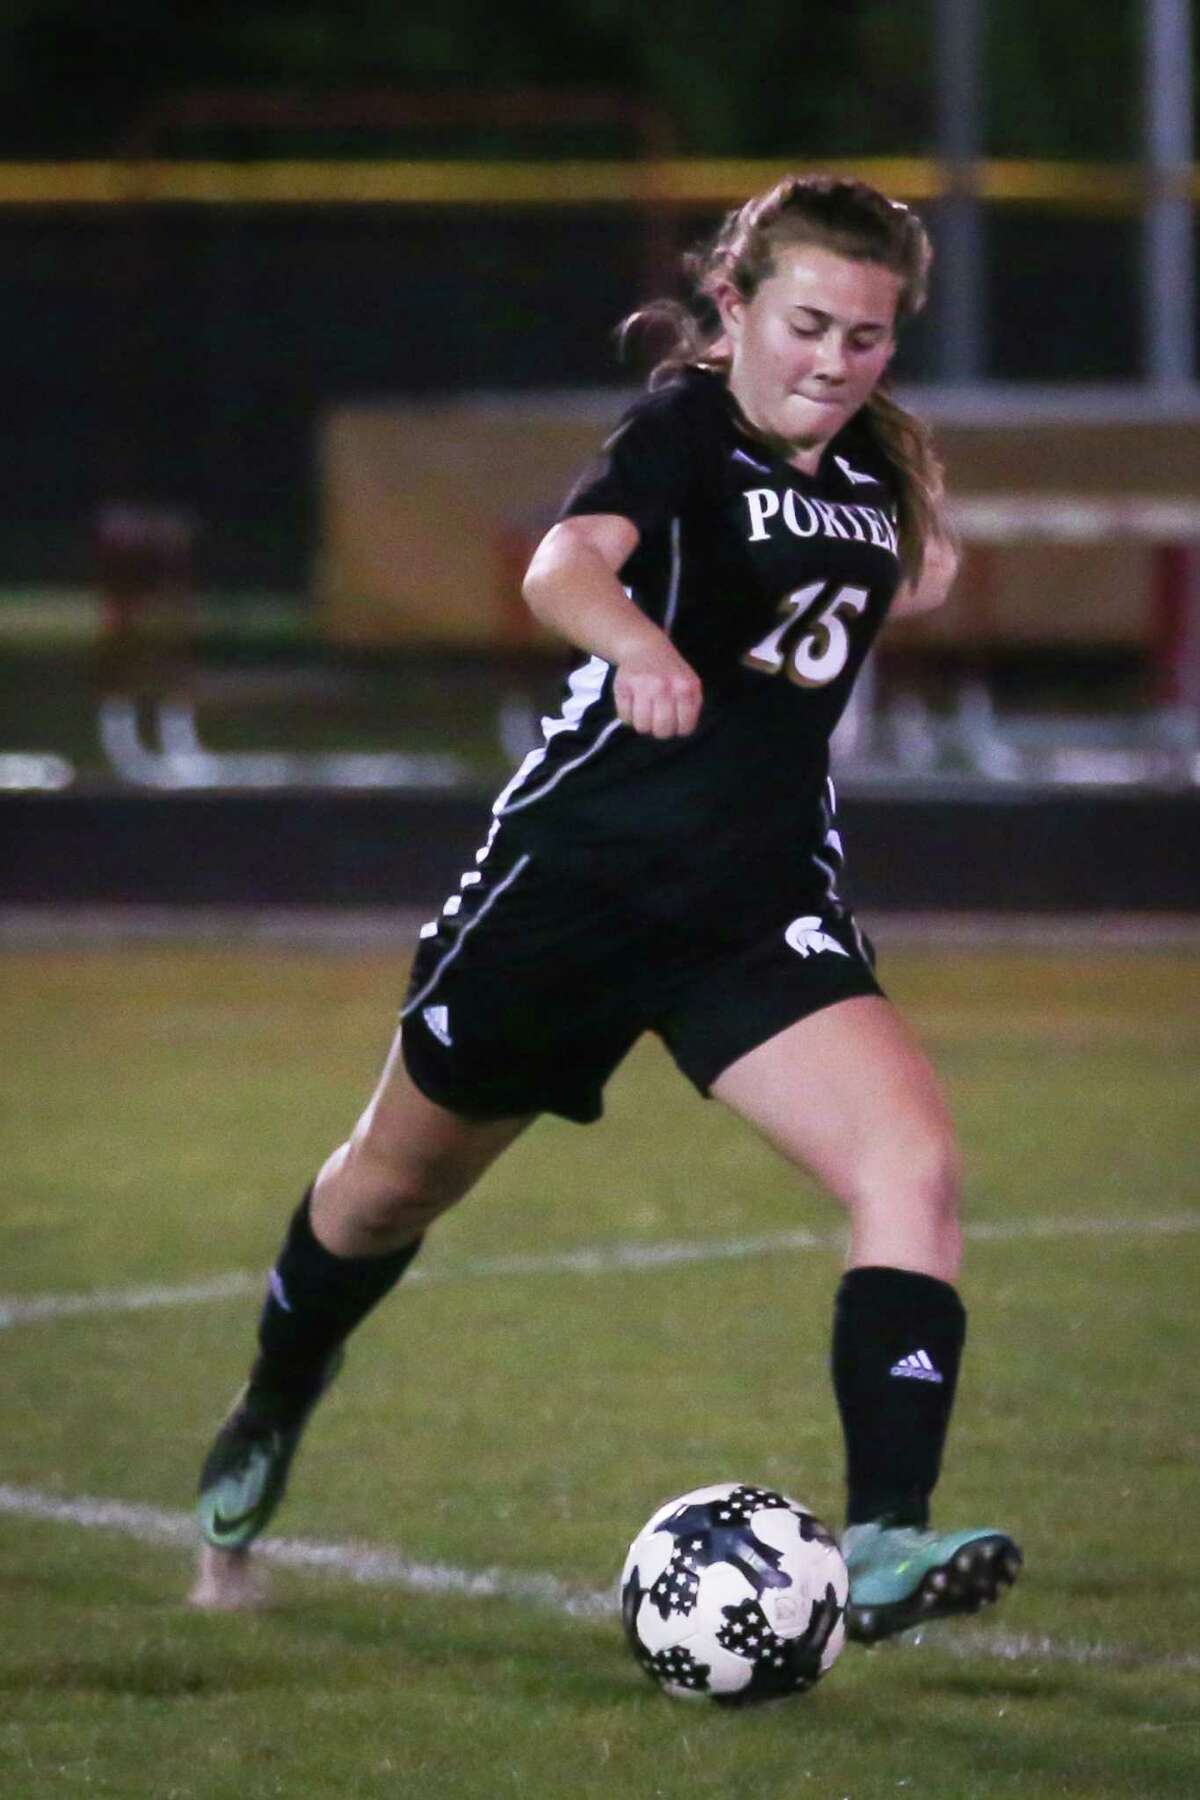 Porter's Atliy Kolodziejski (15) controls the ball during the girls soccer game against Caney Creek on Tuesday, March 20, 2018, at Caney Creek High School. (Michael Minasi / Houston Chronicle)